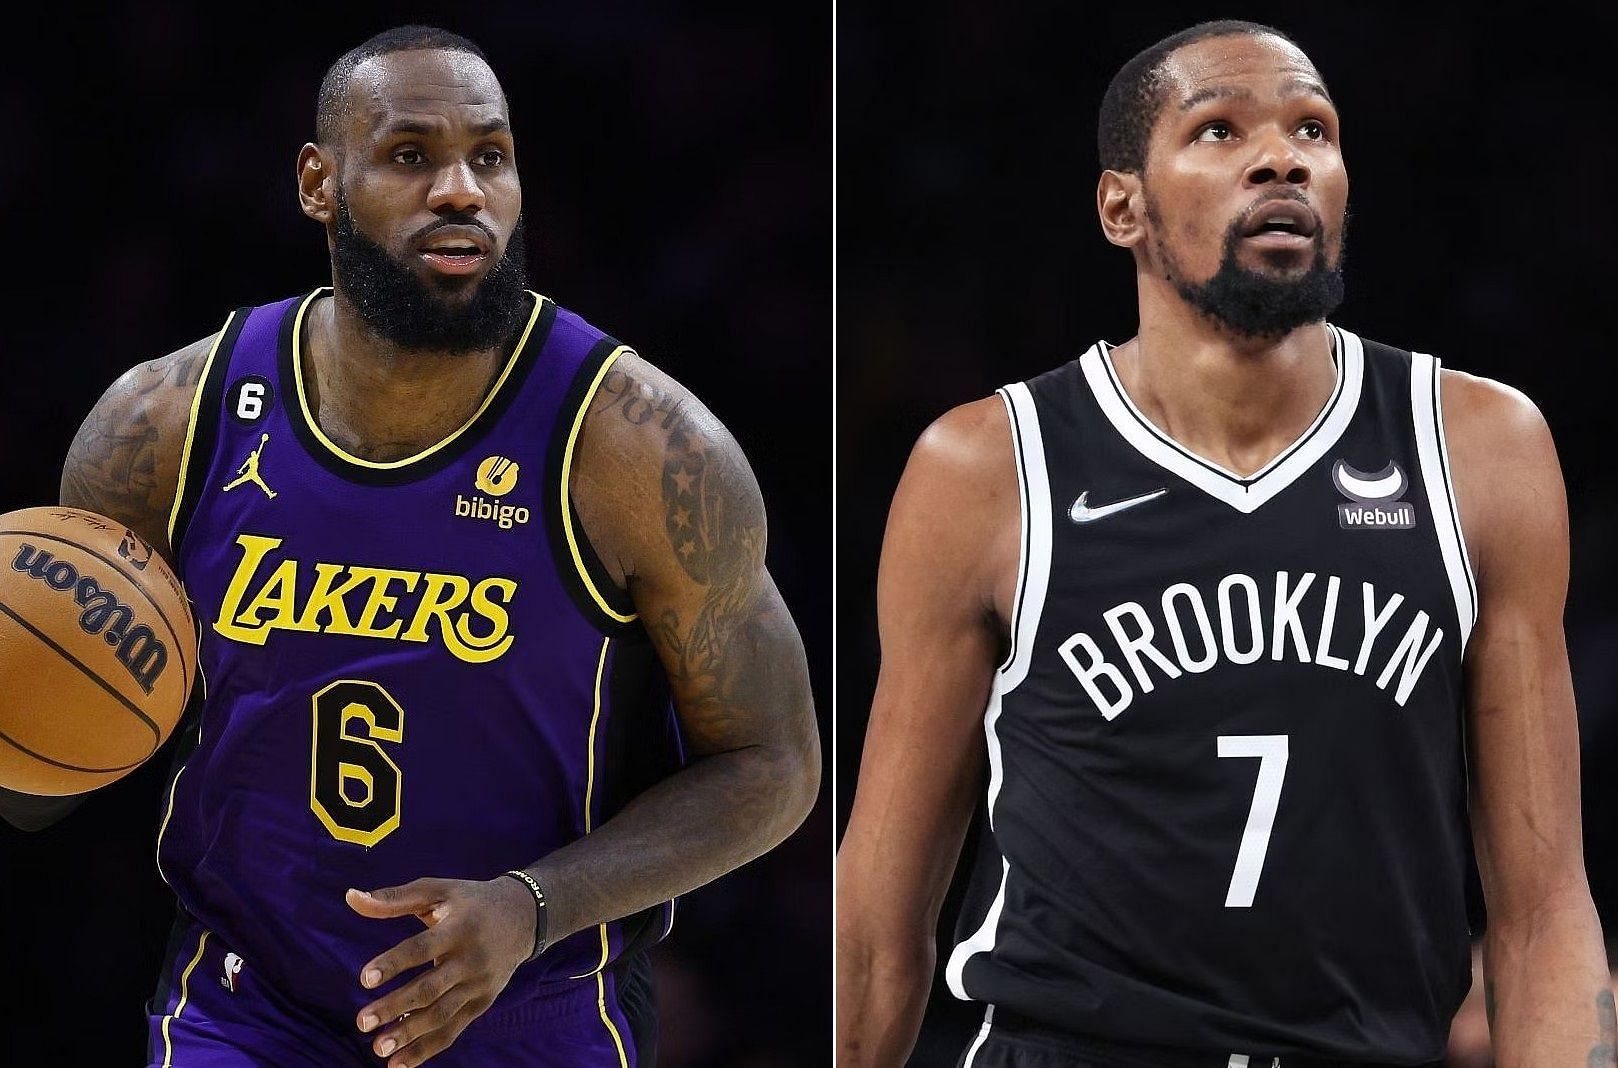 LeBron James of the LA Lakers and Kevin Durant of the Brooklyn Nets